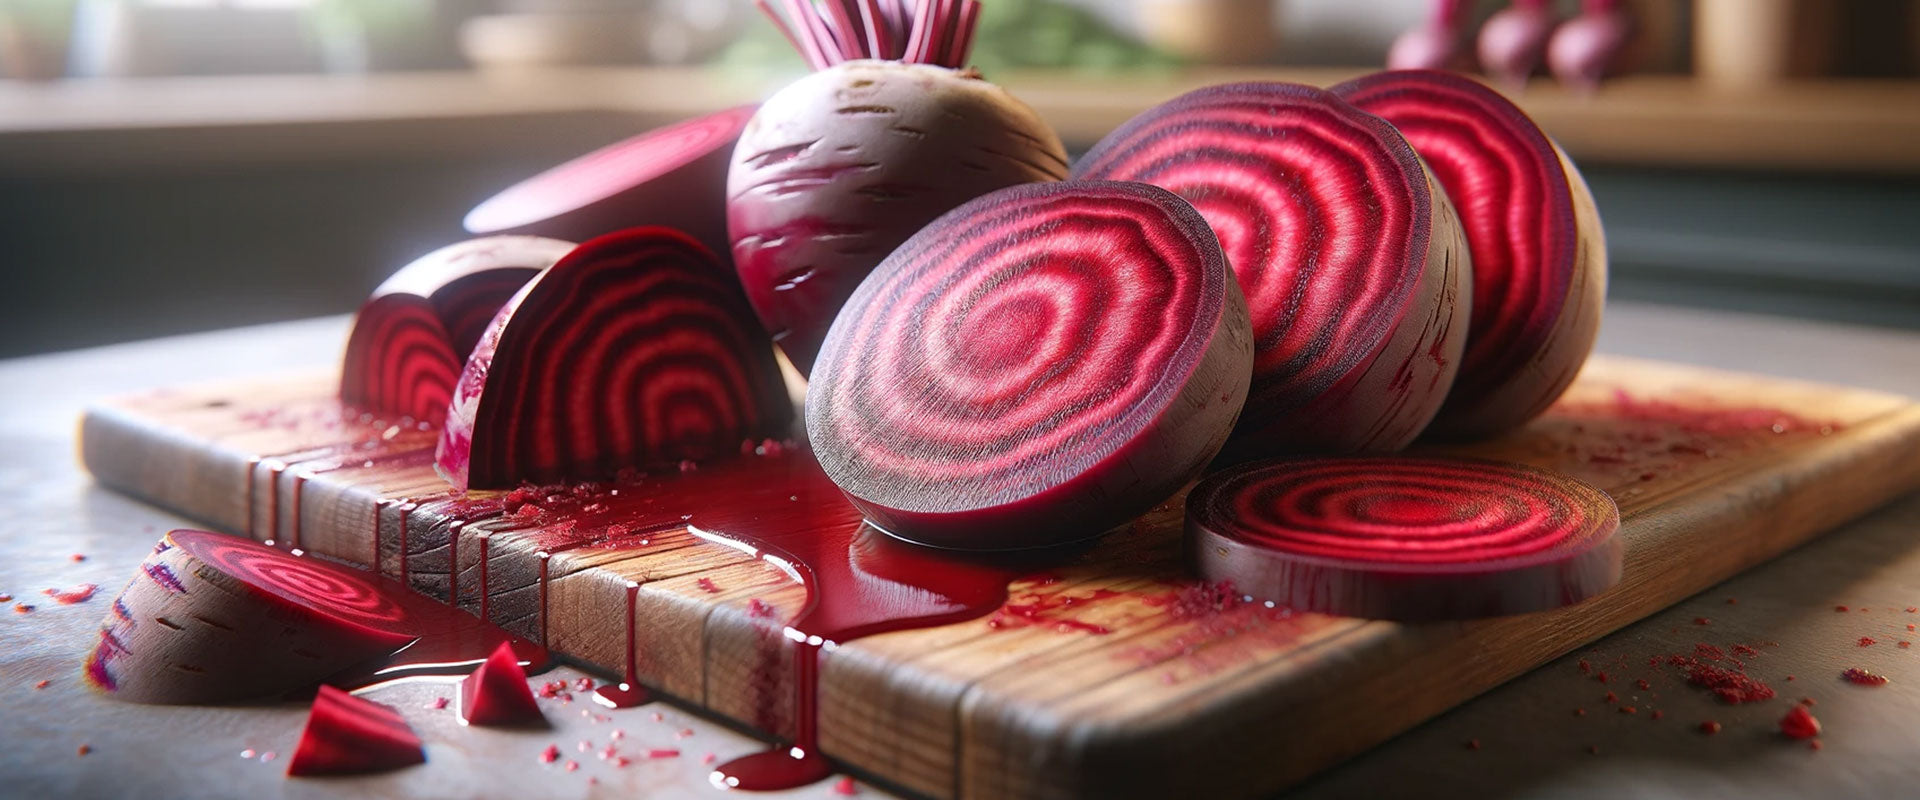 red beets on a cutting board as a natural red food coloring